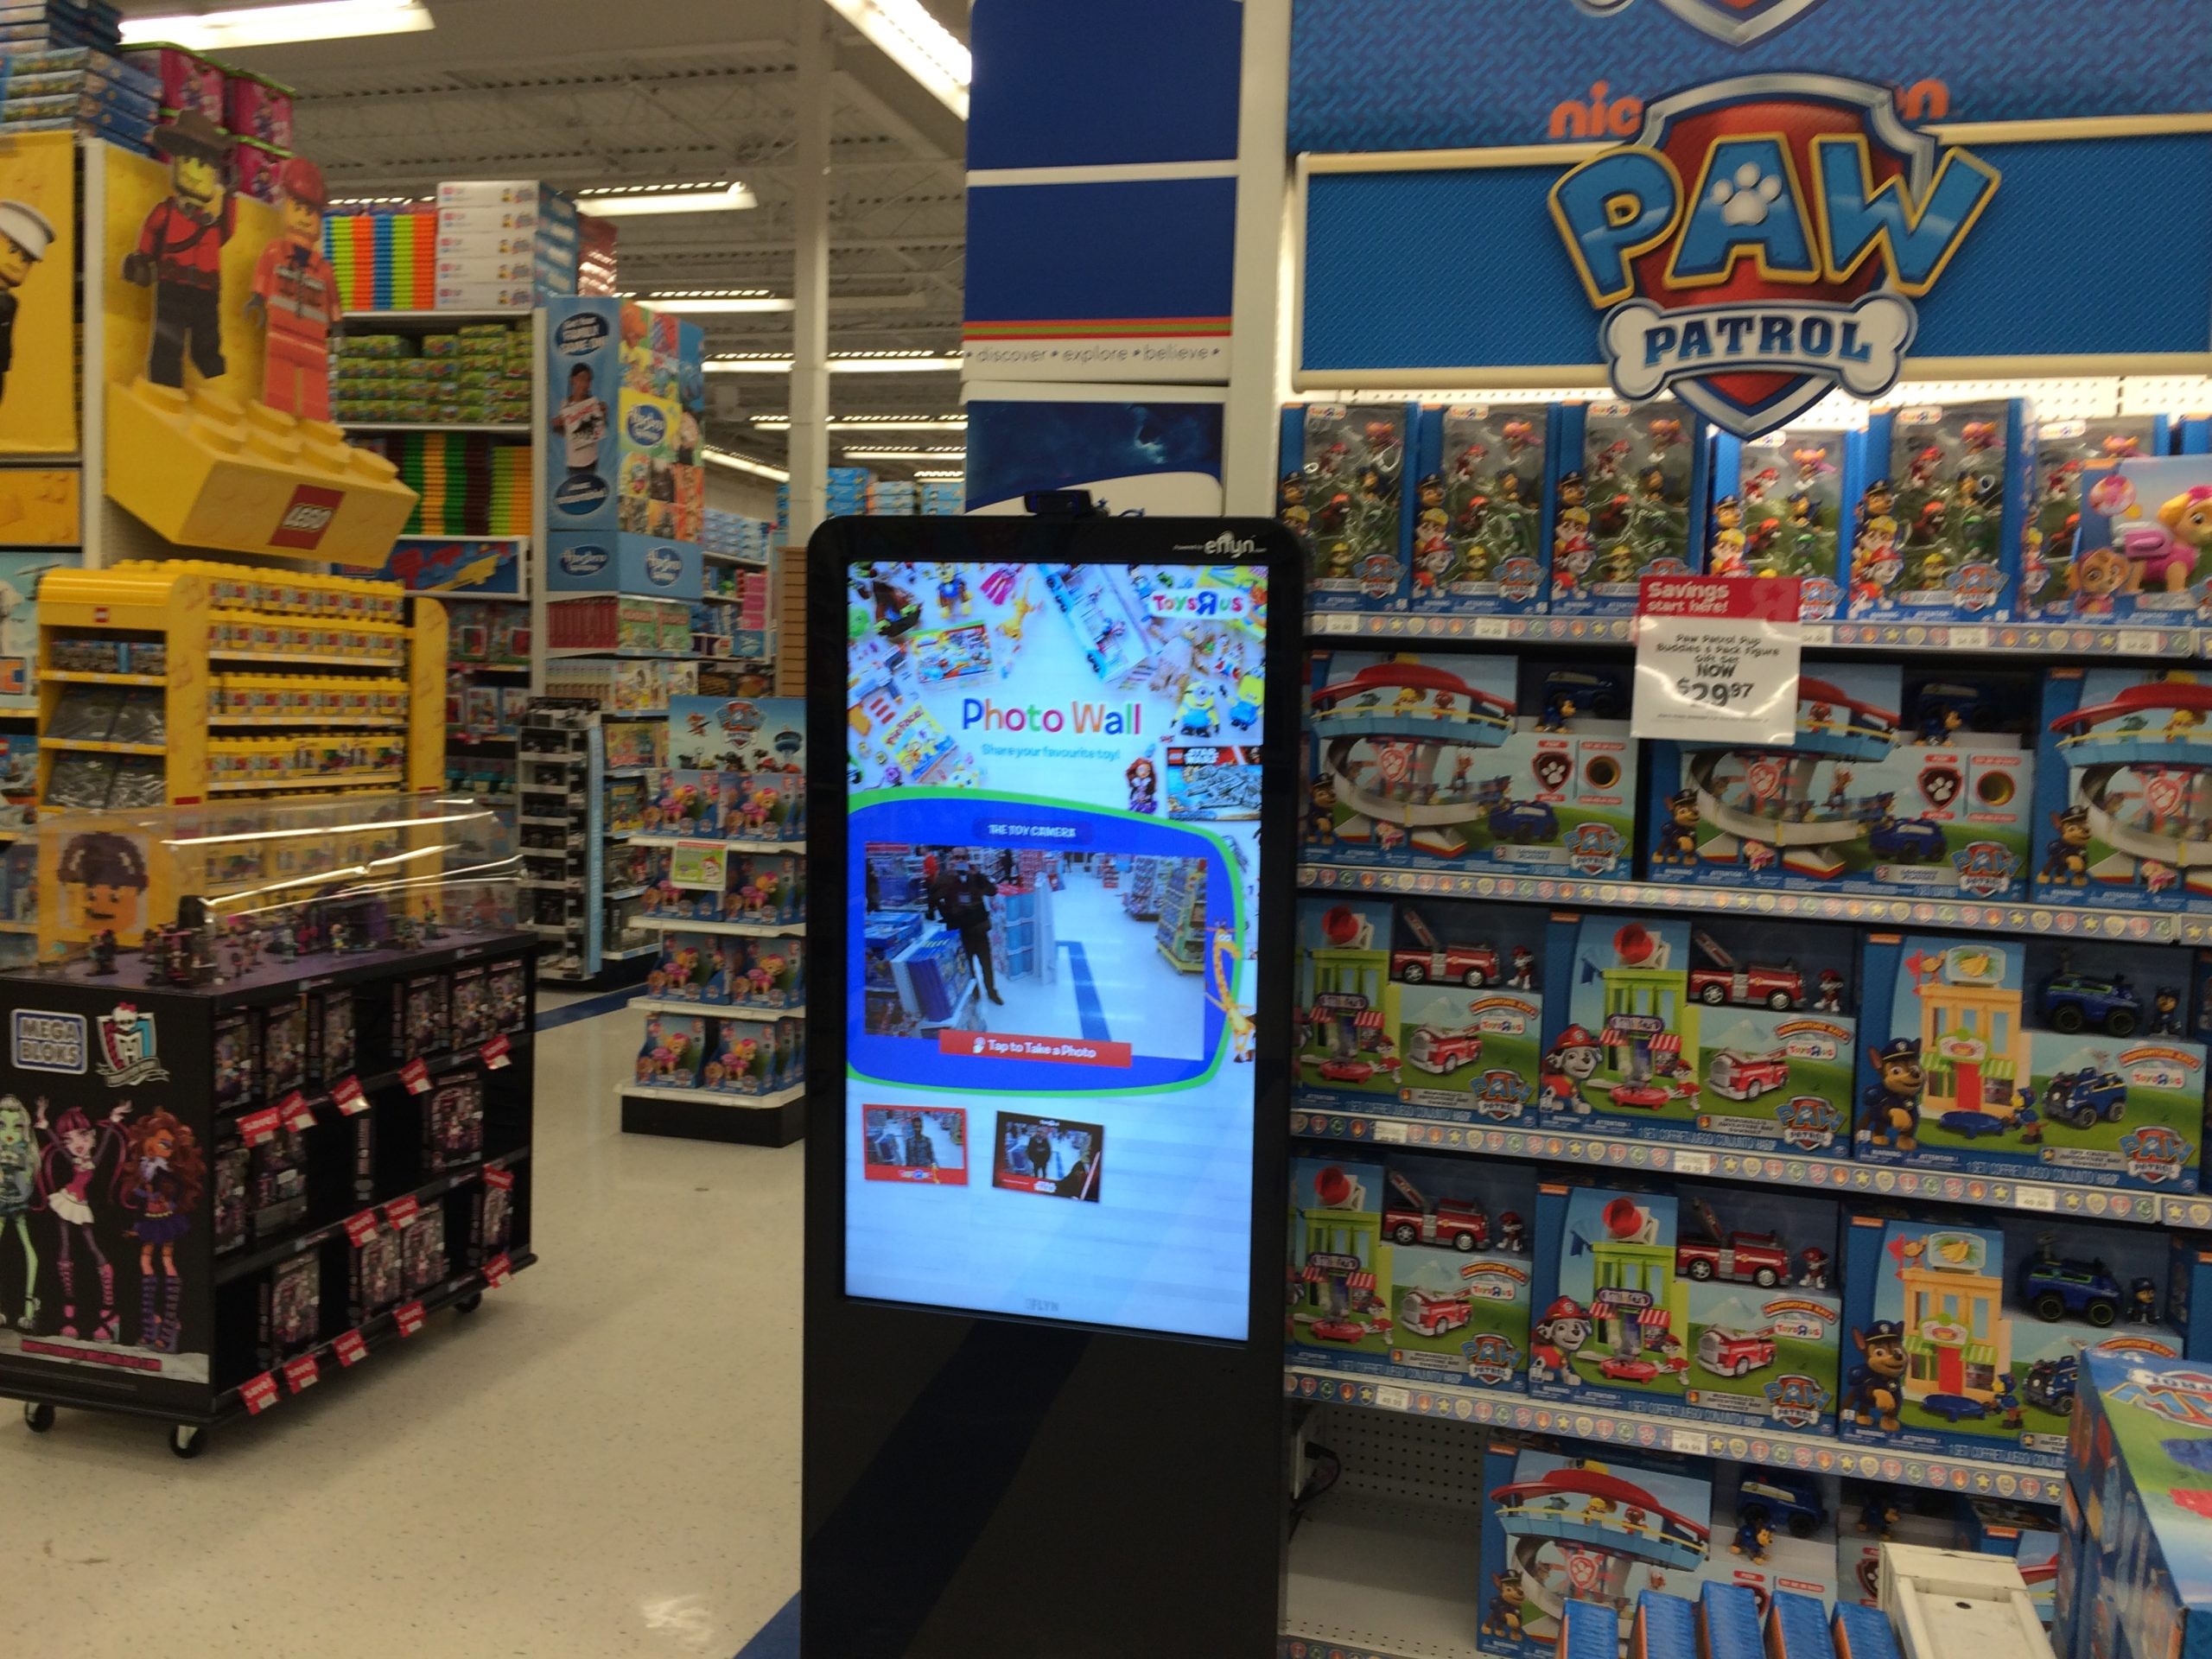 Eflyn's Festive Holiday Marketing Campaign at Toys R Us: Interactive Photo Wall, Holiday Video Postcards, and More!